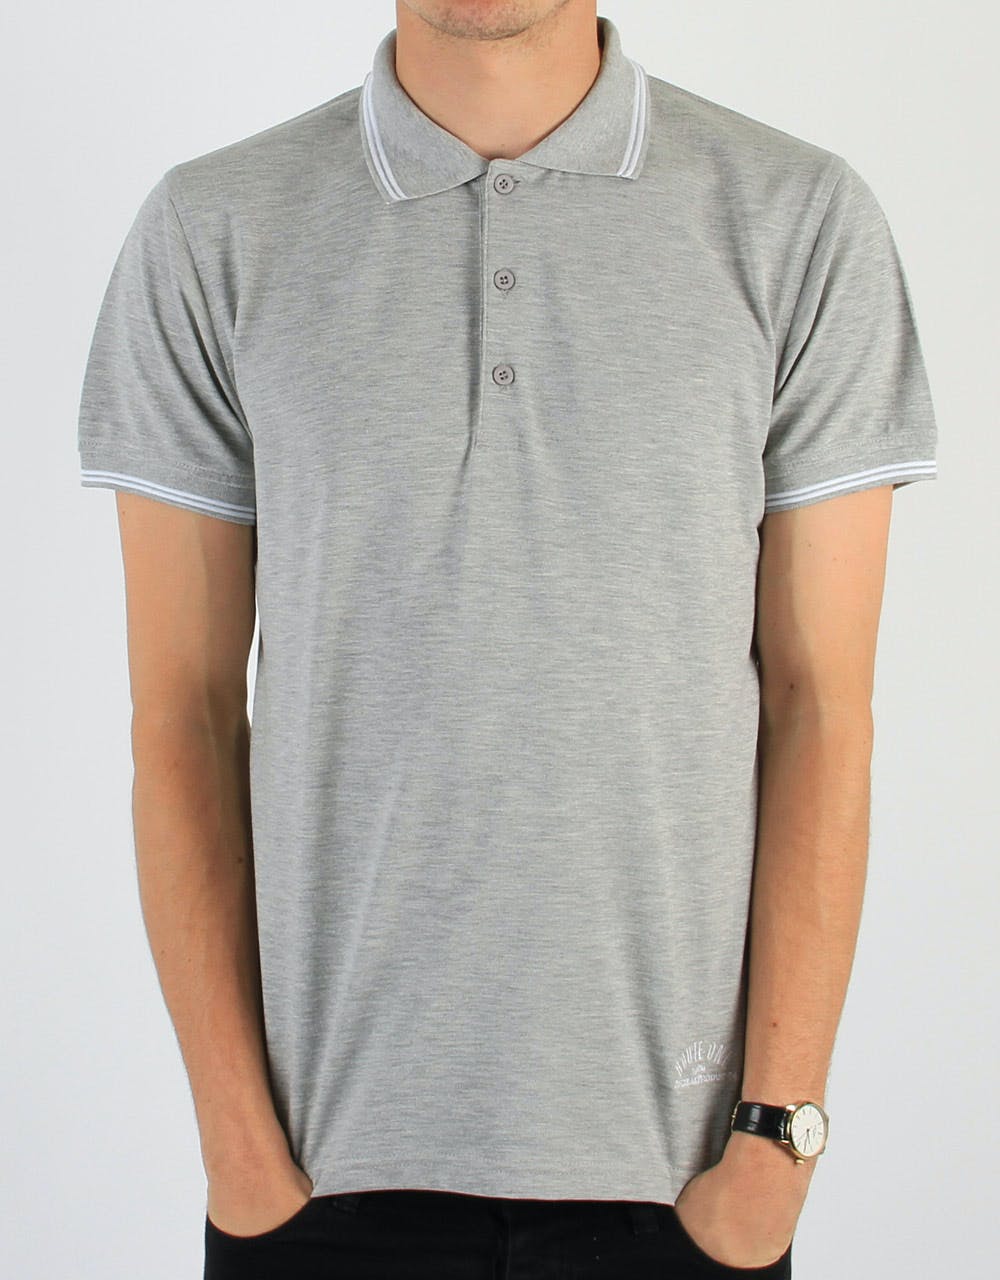 Route One Polo Shirt - Grey